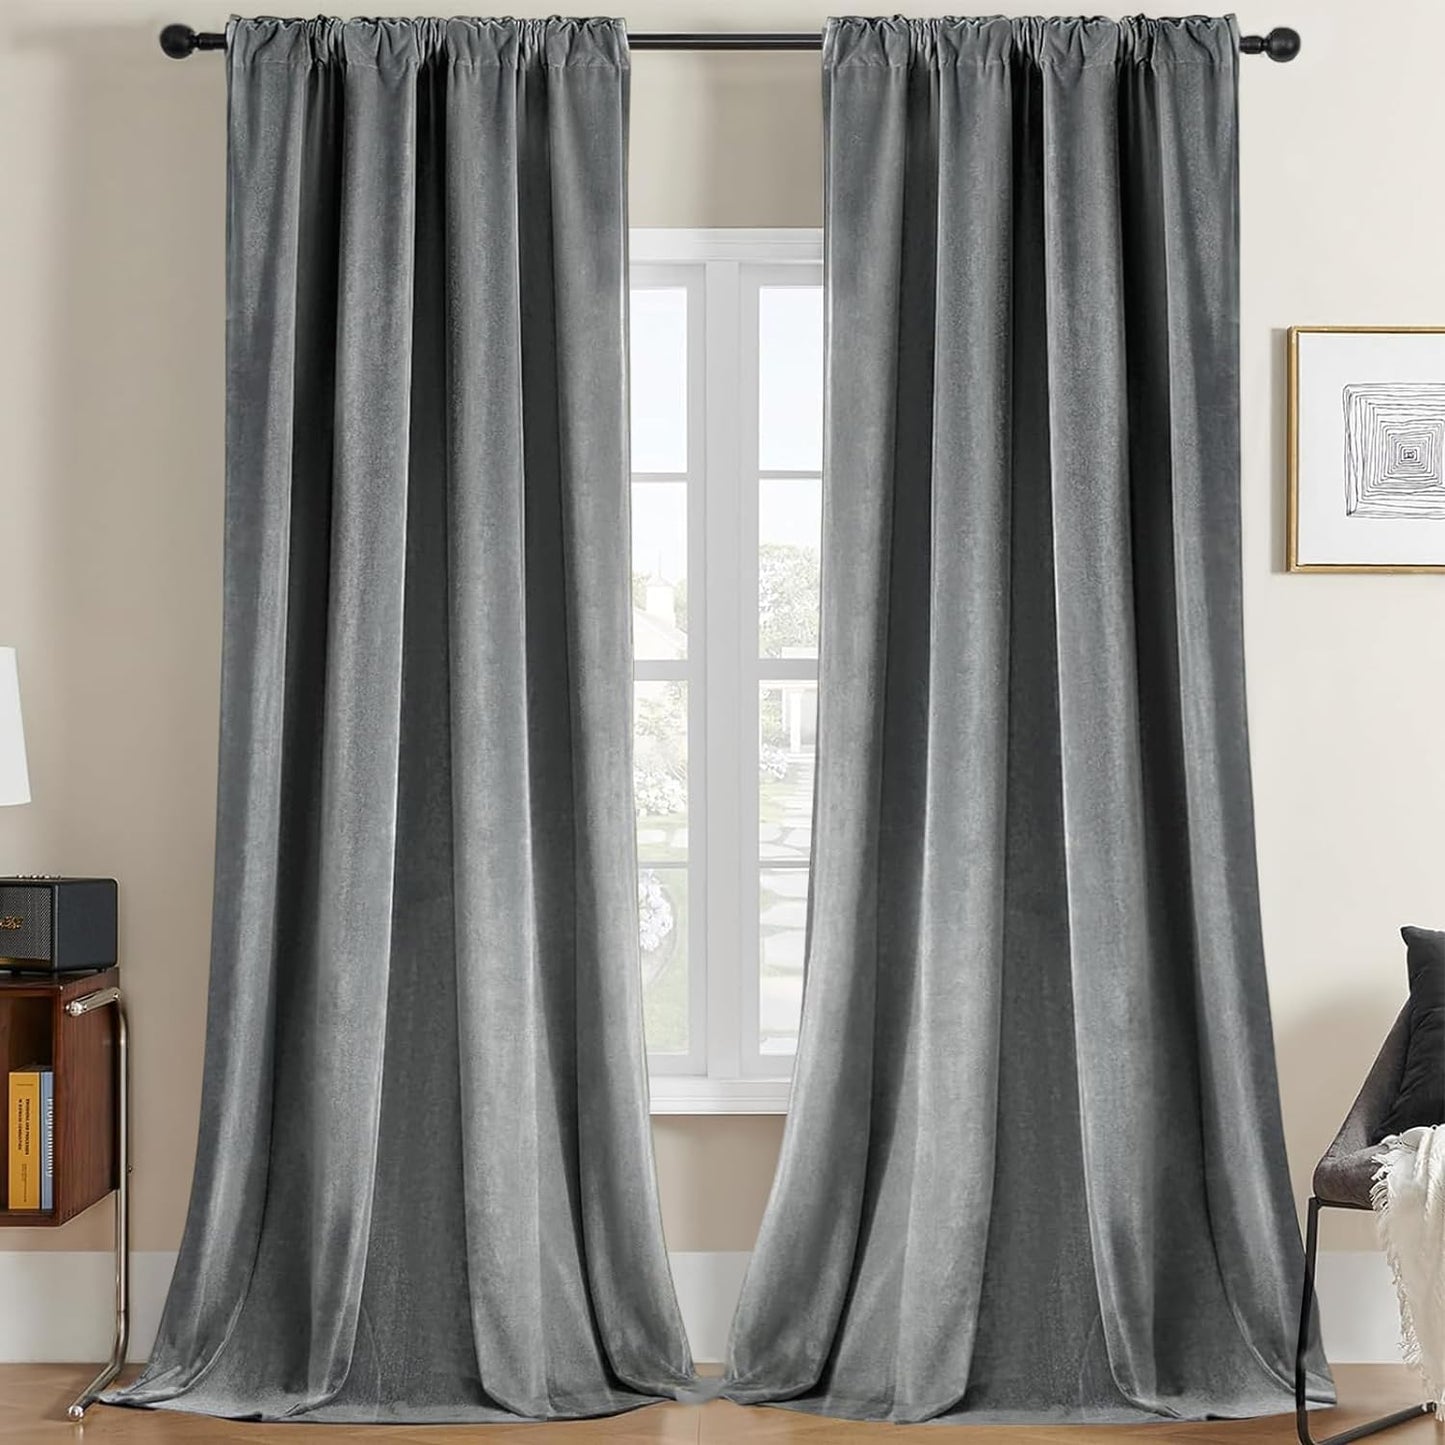 Joydeco Black Velvet Curtains 90 Inch Length 2 Panels, Luxury Blackout Rod Pocket Thermal Insulated Window Curtains, Super Soft Room Darkening Drapes for Living Dining Room Bedroom,W52 X L90 Inches  Joydeco Rod Pocket | Dark Grey 52W X 72L Inch X 2 Panels 